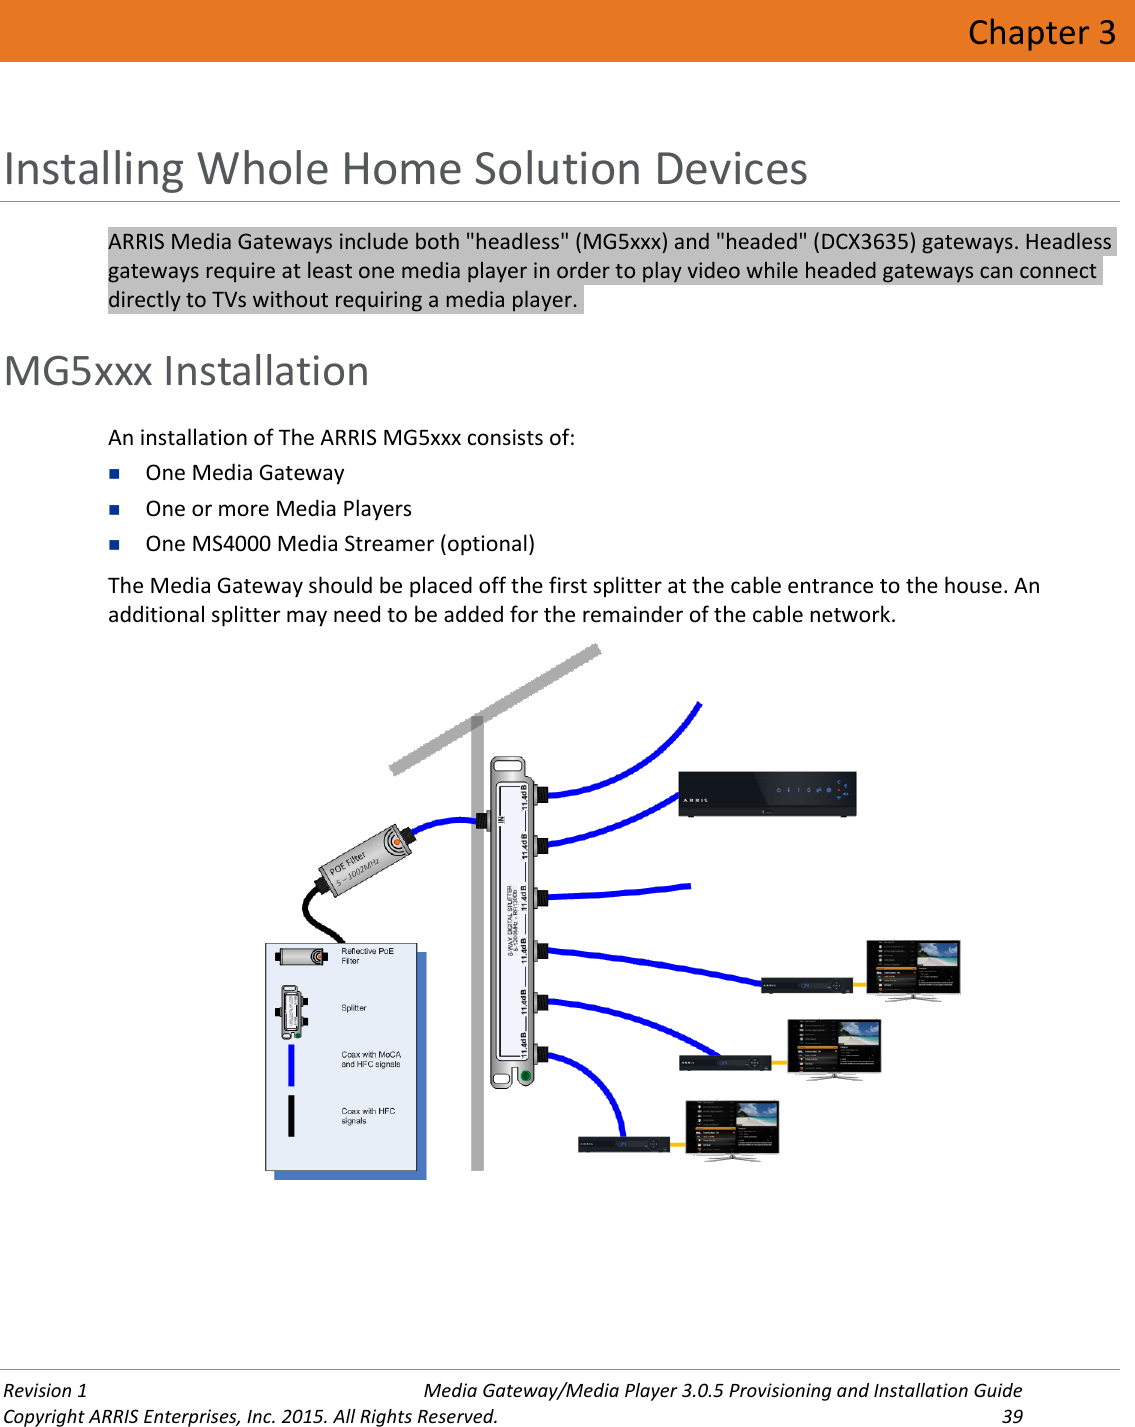  Revision 1  Media Gateway/Media Player 3.0.5 Provisioning and Installation Guide Copyright ARRIS Enterprises, Inc. 2015. All Rights Reserved.  39  Chapter 3 Installing Whole Home Solution Devices ARRIS Media Gateways include both &quot;headless&quot; (MG5xxx) and &quot;headed&quot; (DCX3635) gateways. Headless gateways require at least one media player in order to play video while headed gateways can connect directly to TVs without requiring a media player.    MG5xxx Installation An installation of The ARRIS MG5xxx consists of:  One Media Gateway  One or more Media Players  One MS4000 Media Streamer (optional) The Media Gateway should be placed off the first splitter at the cable entrance to the house. An additional splitter may need to be added for the remainder of the cable network.     